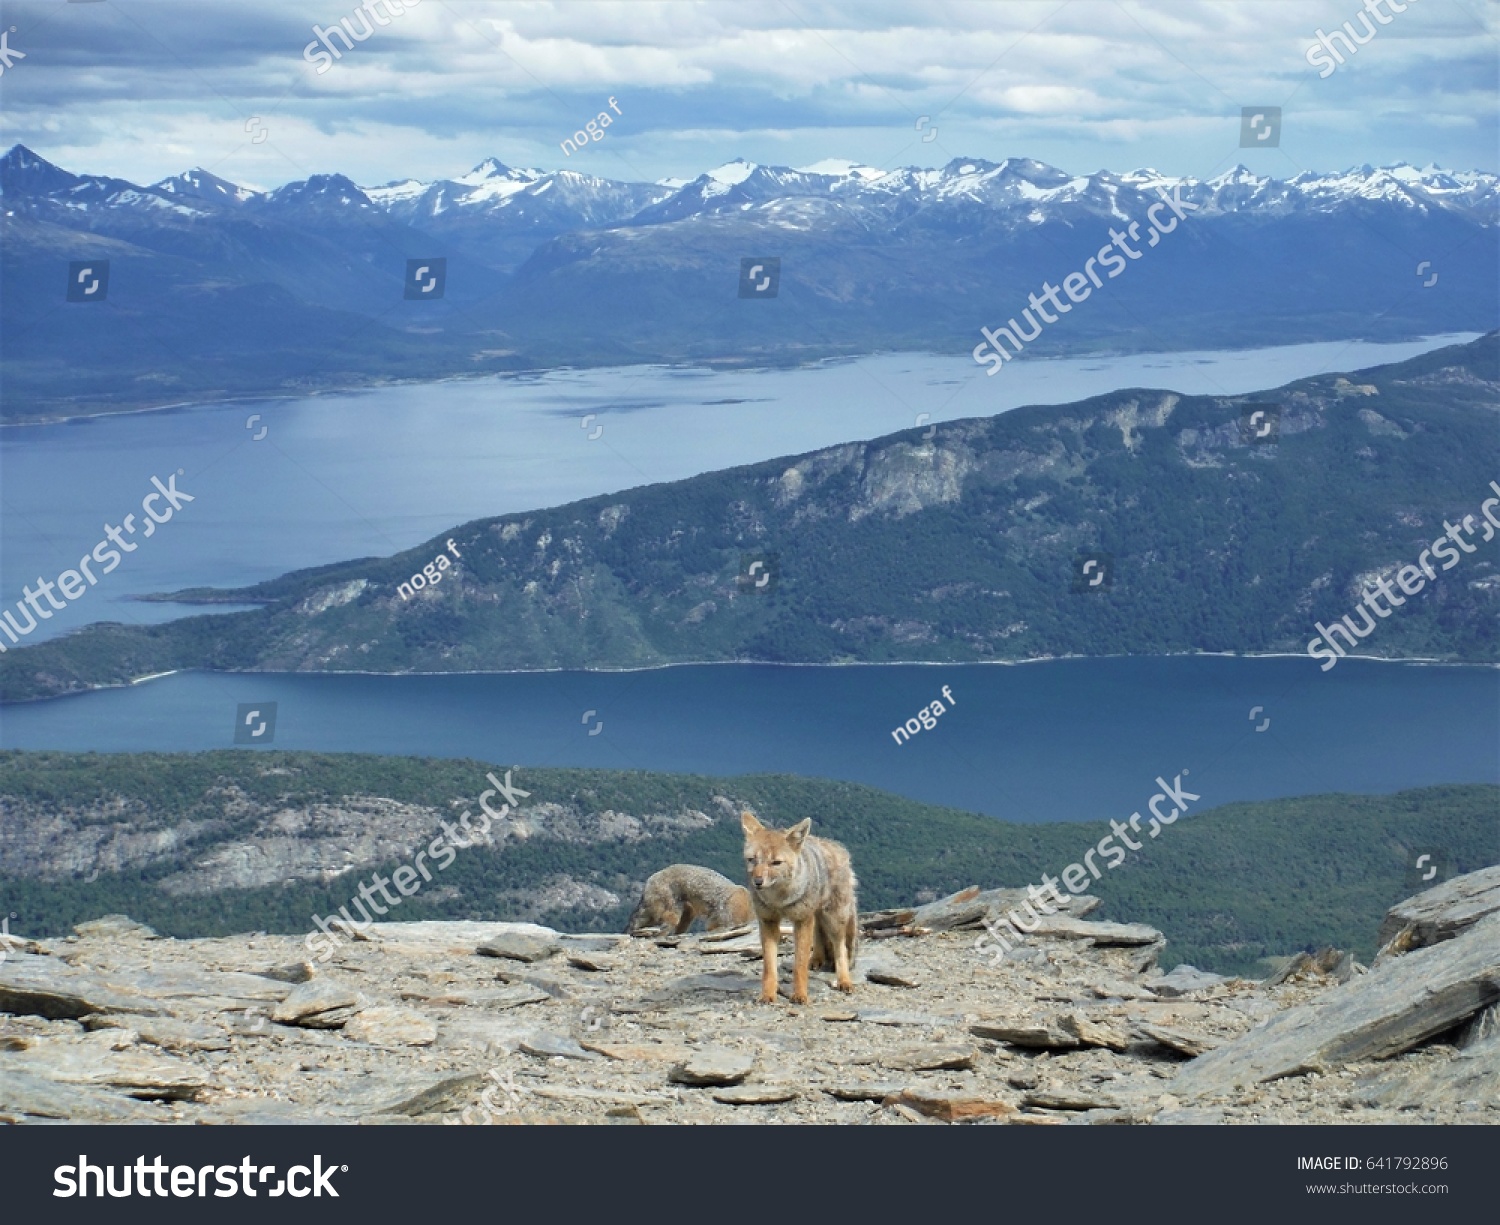 foxes and the view of  TIERRA DEL FUEGO, ARGENTINA #641792896